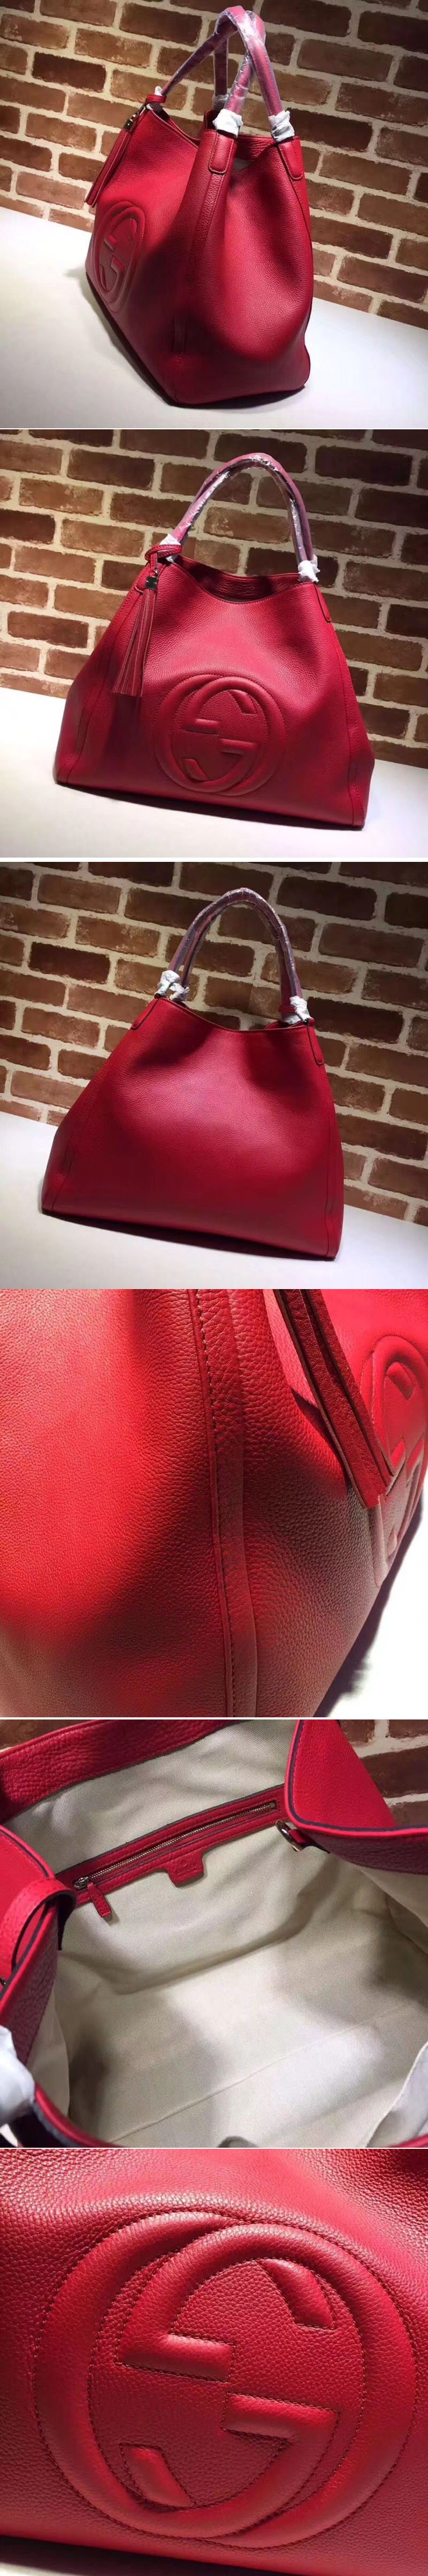 Replica Gucci 282308 Soho Large Leather Shoulder Bags Red